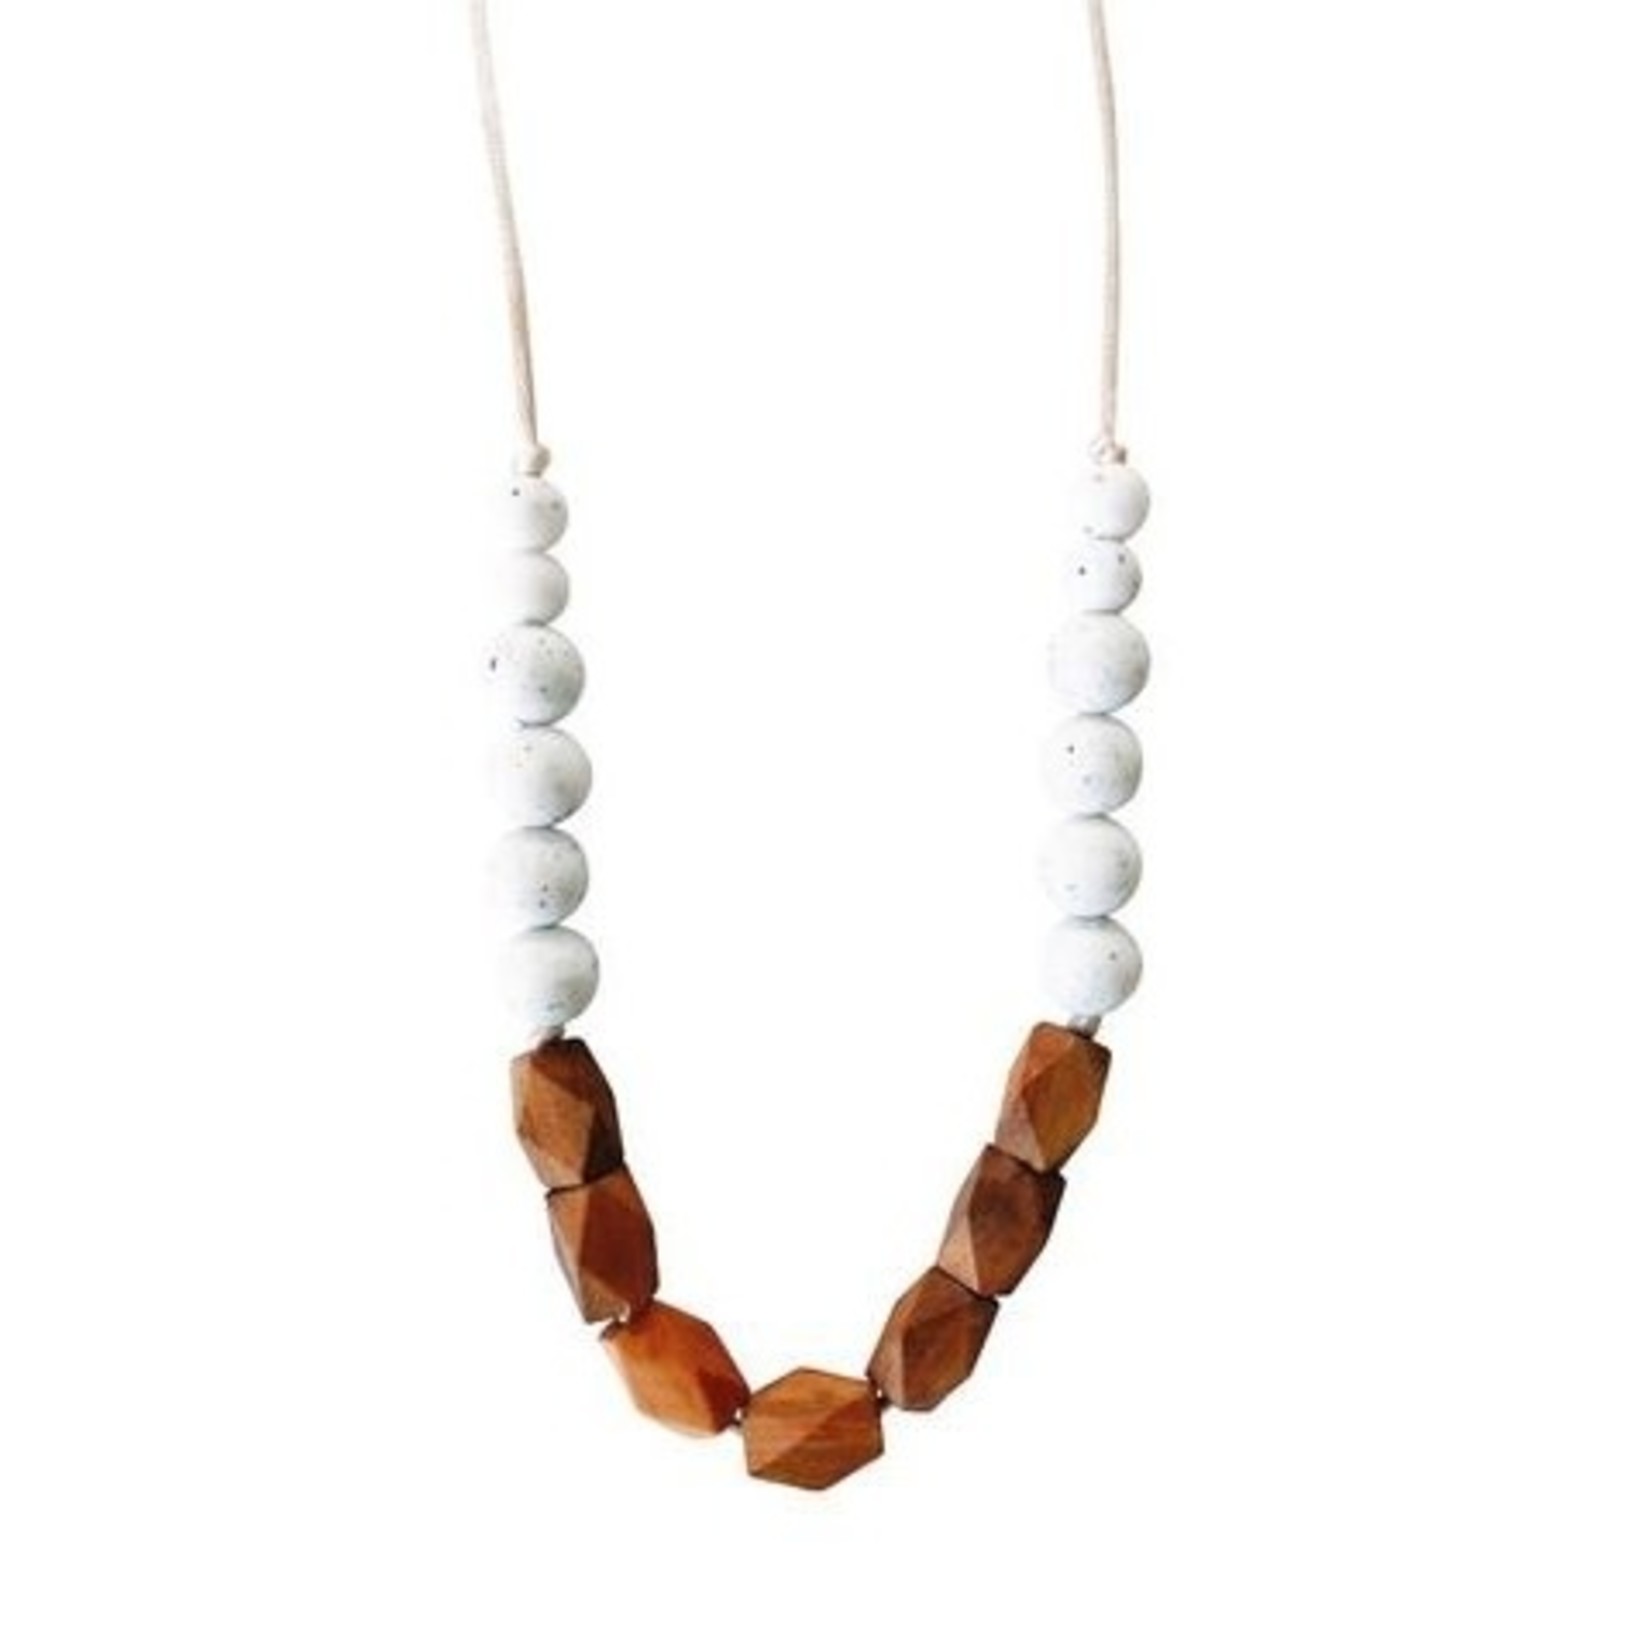 Chewable Charm Teething Necklace - The Harrison Moonstone